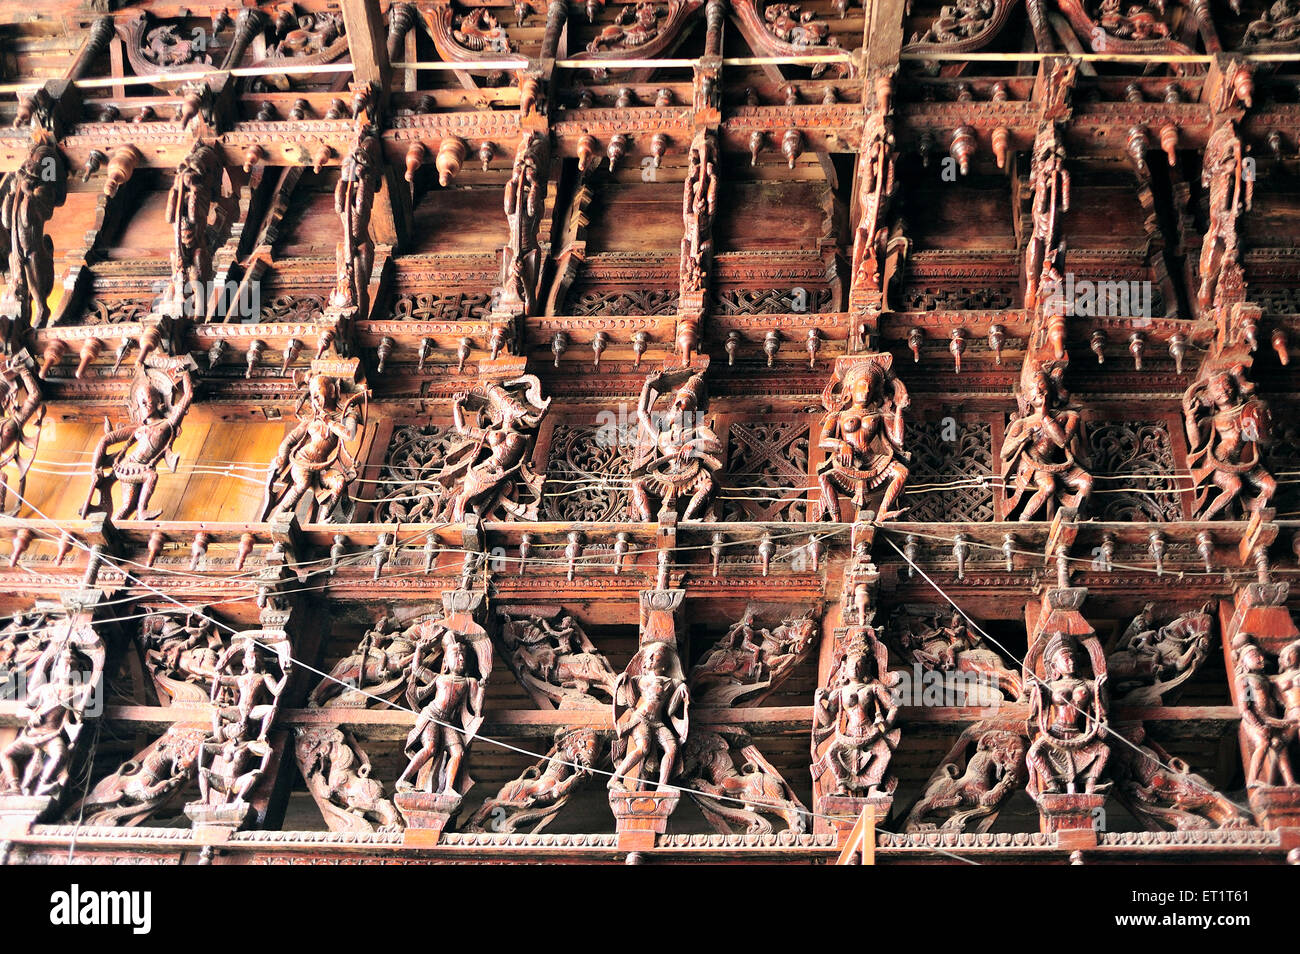 Wooden carving on the ceiling of kanthimathi nellaiappar temple at tamilnadu india Asia Stock Photo